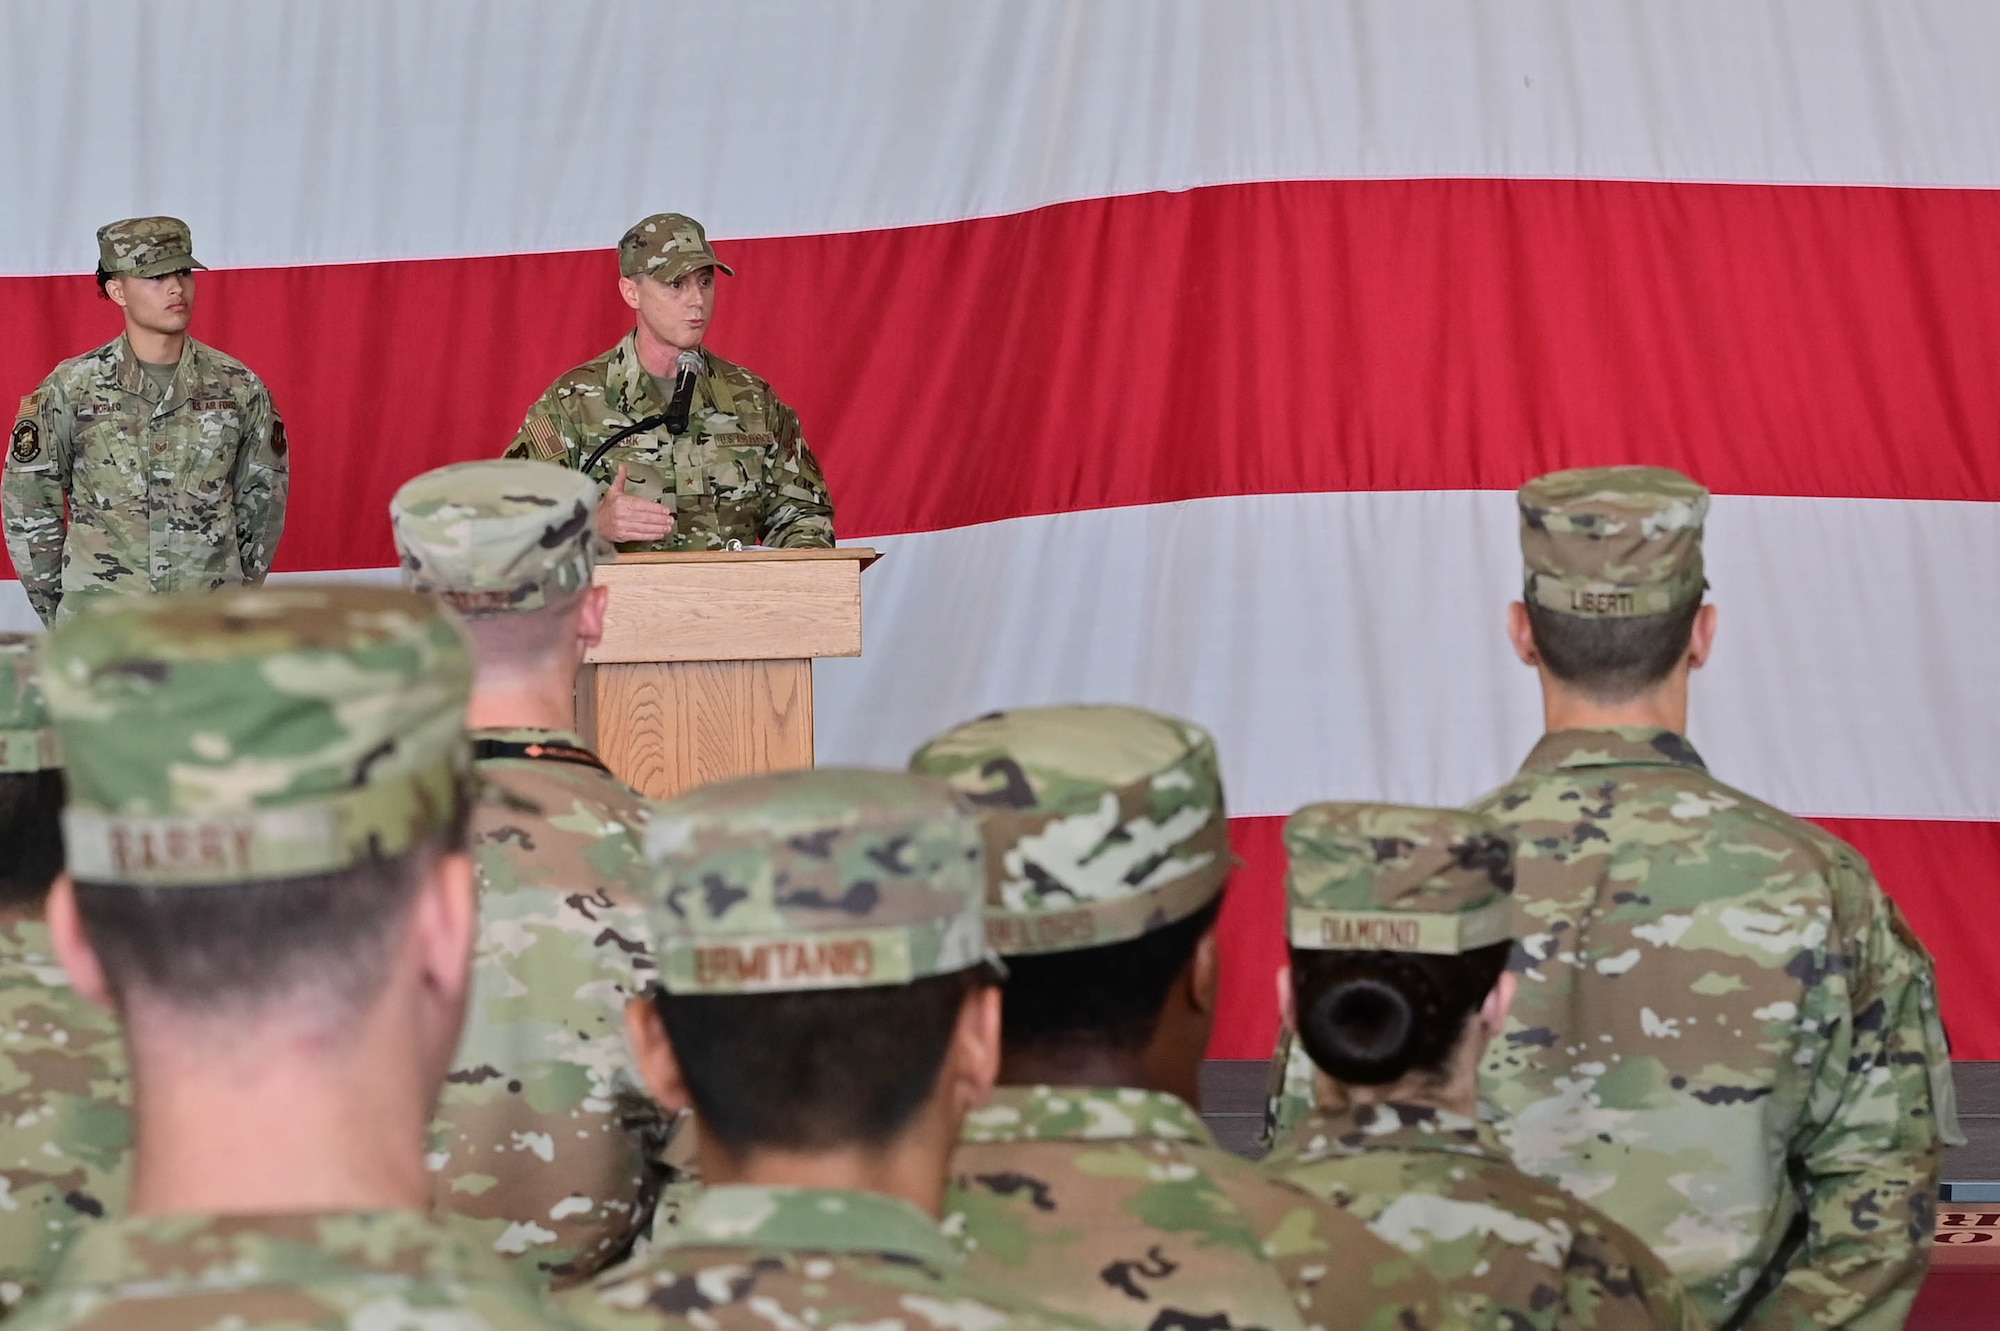 U.S. Air Force Brig. Gen. Tad Clark, 31st Fighter Wing commander, gives a speech to the 31st Maintenance Group during a change of command ceremony at Aviano Air Base, Italy, June 15, 2023. The 31st Maintenance Group manages Europe’s largest munitions stockpile of 3.94 million items valued at $598 million. (U.S. Air Force photo by Airman Zachary Jakel)